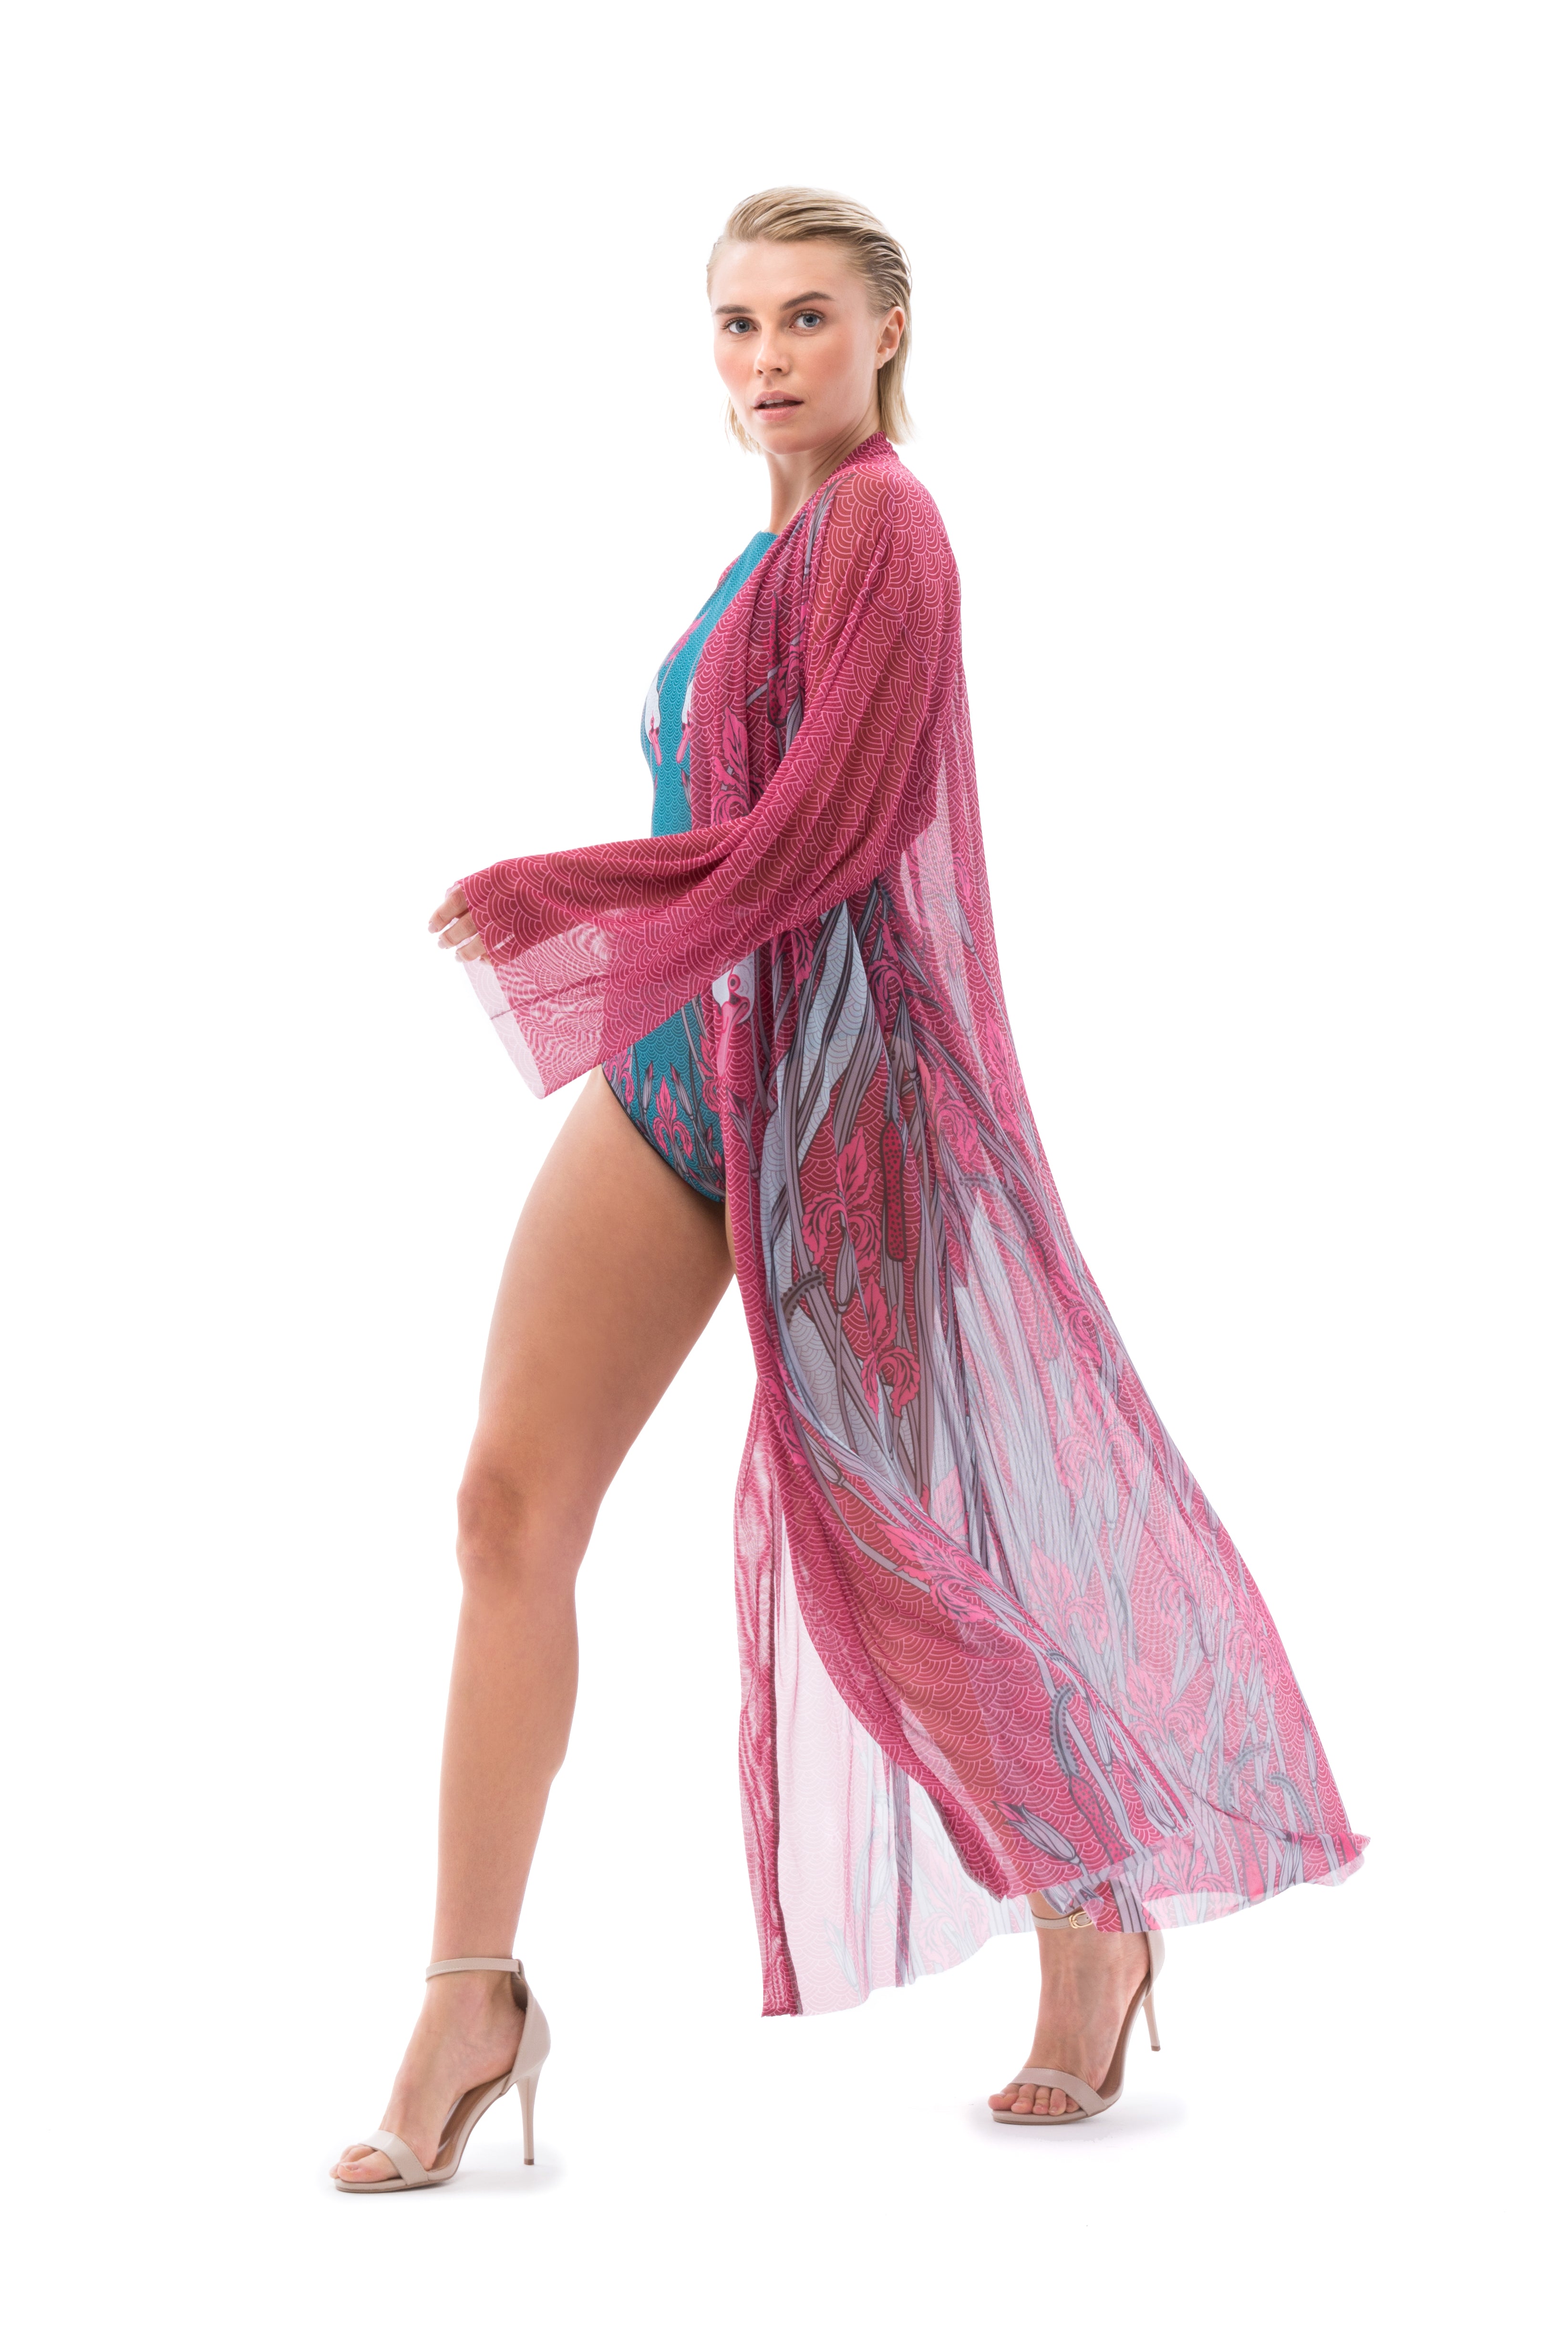 This file showcases sustainable tan-through smart swimsuits with a swans print. It features beach robes with SPF15 protection, offering classic luxury and iconic style for beach outings.